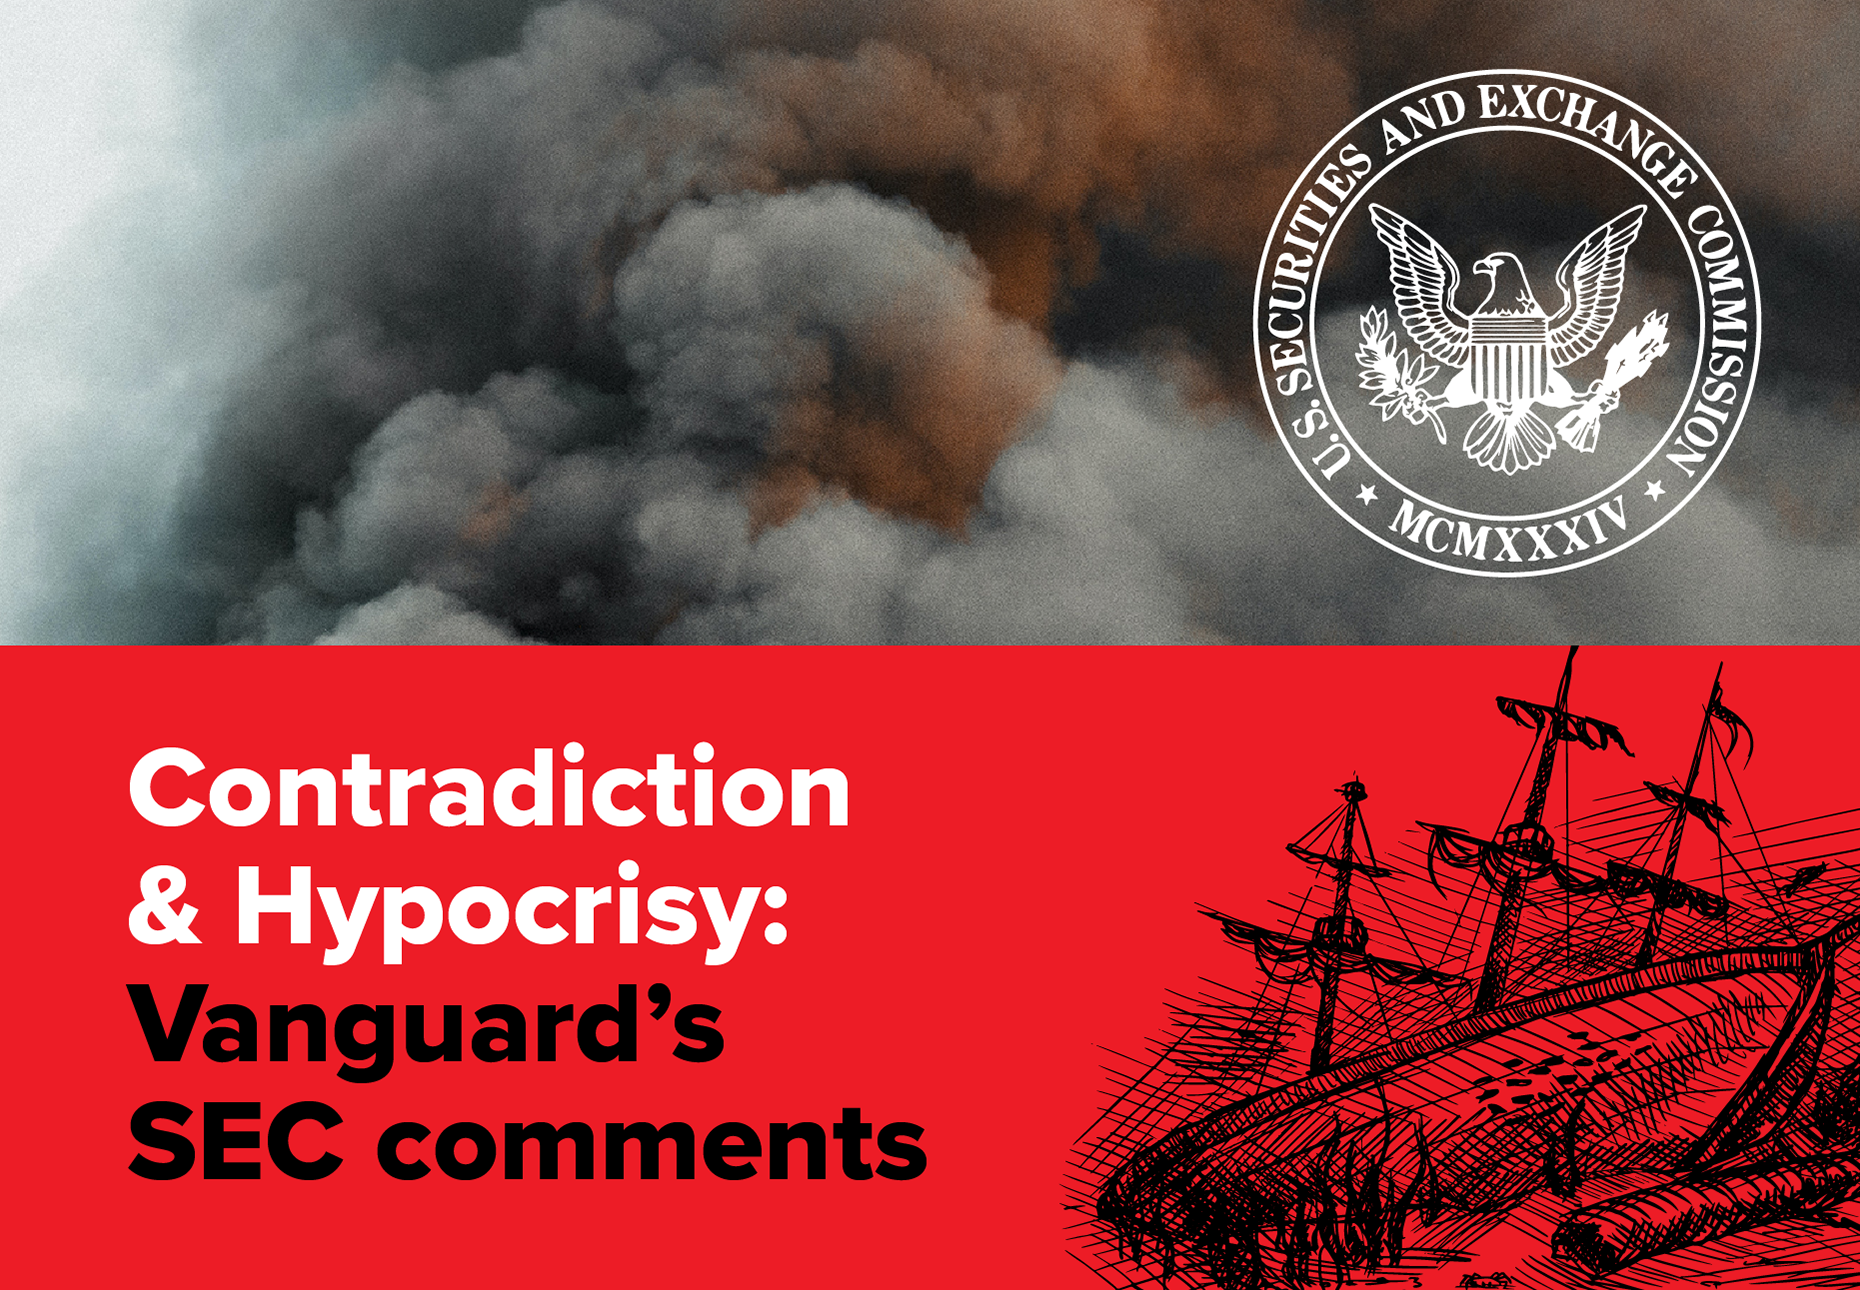 Billowing clouds of smoke with the SEC logo on the right side. A red banner runs along the bottom of the image with text reading: Contradiction & Hypocrisy: Vanguard's SEC comments